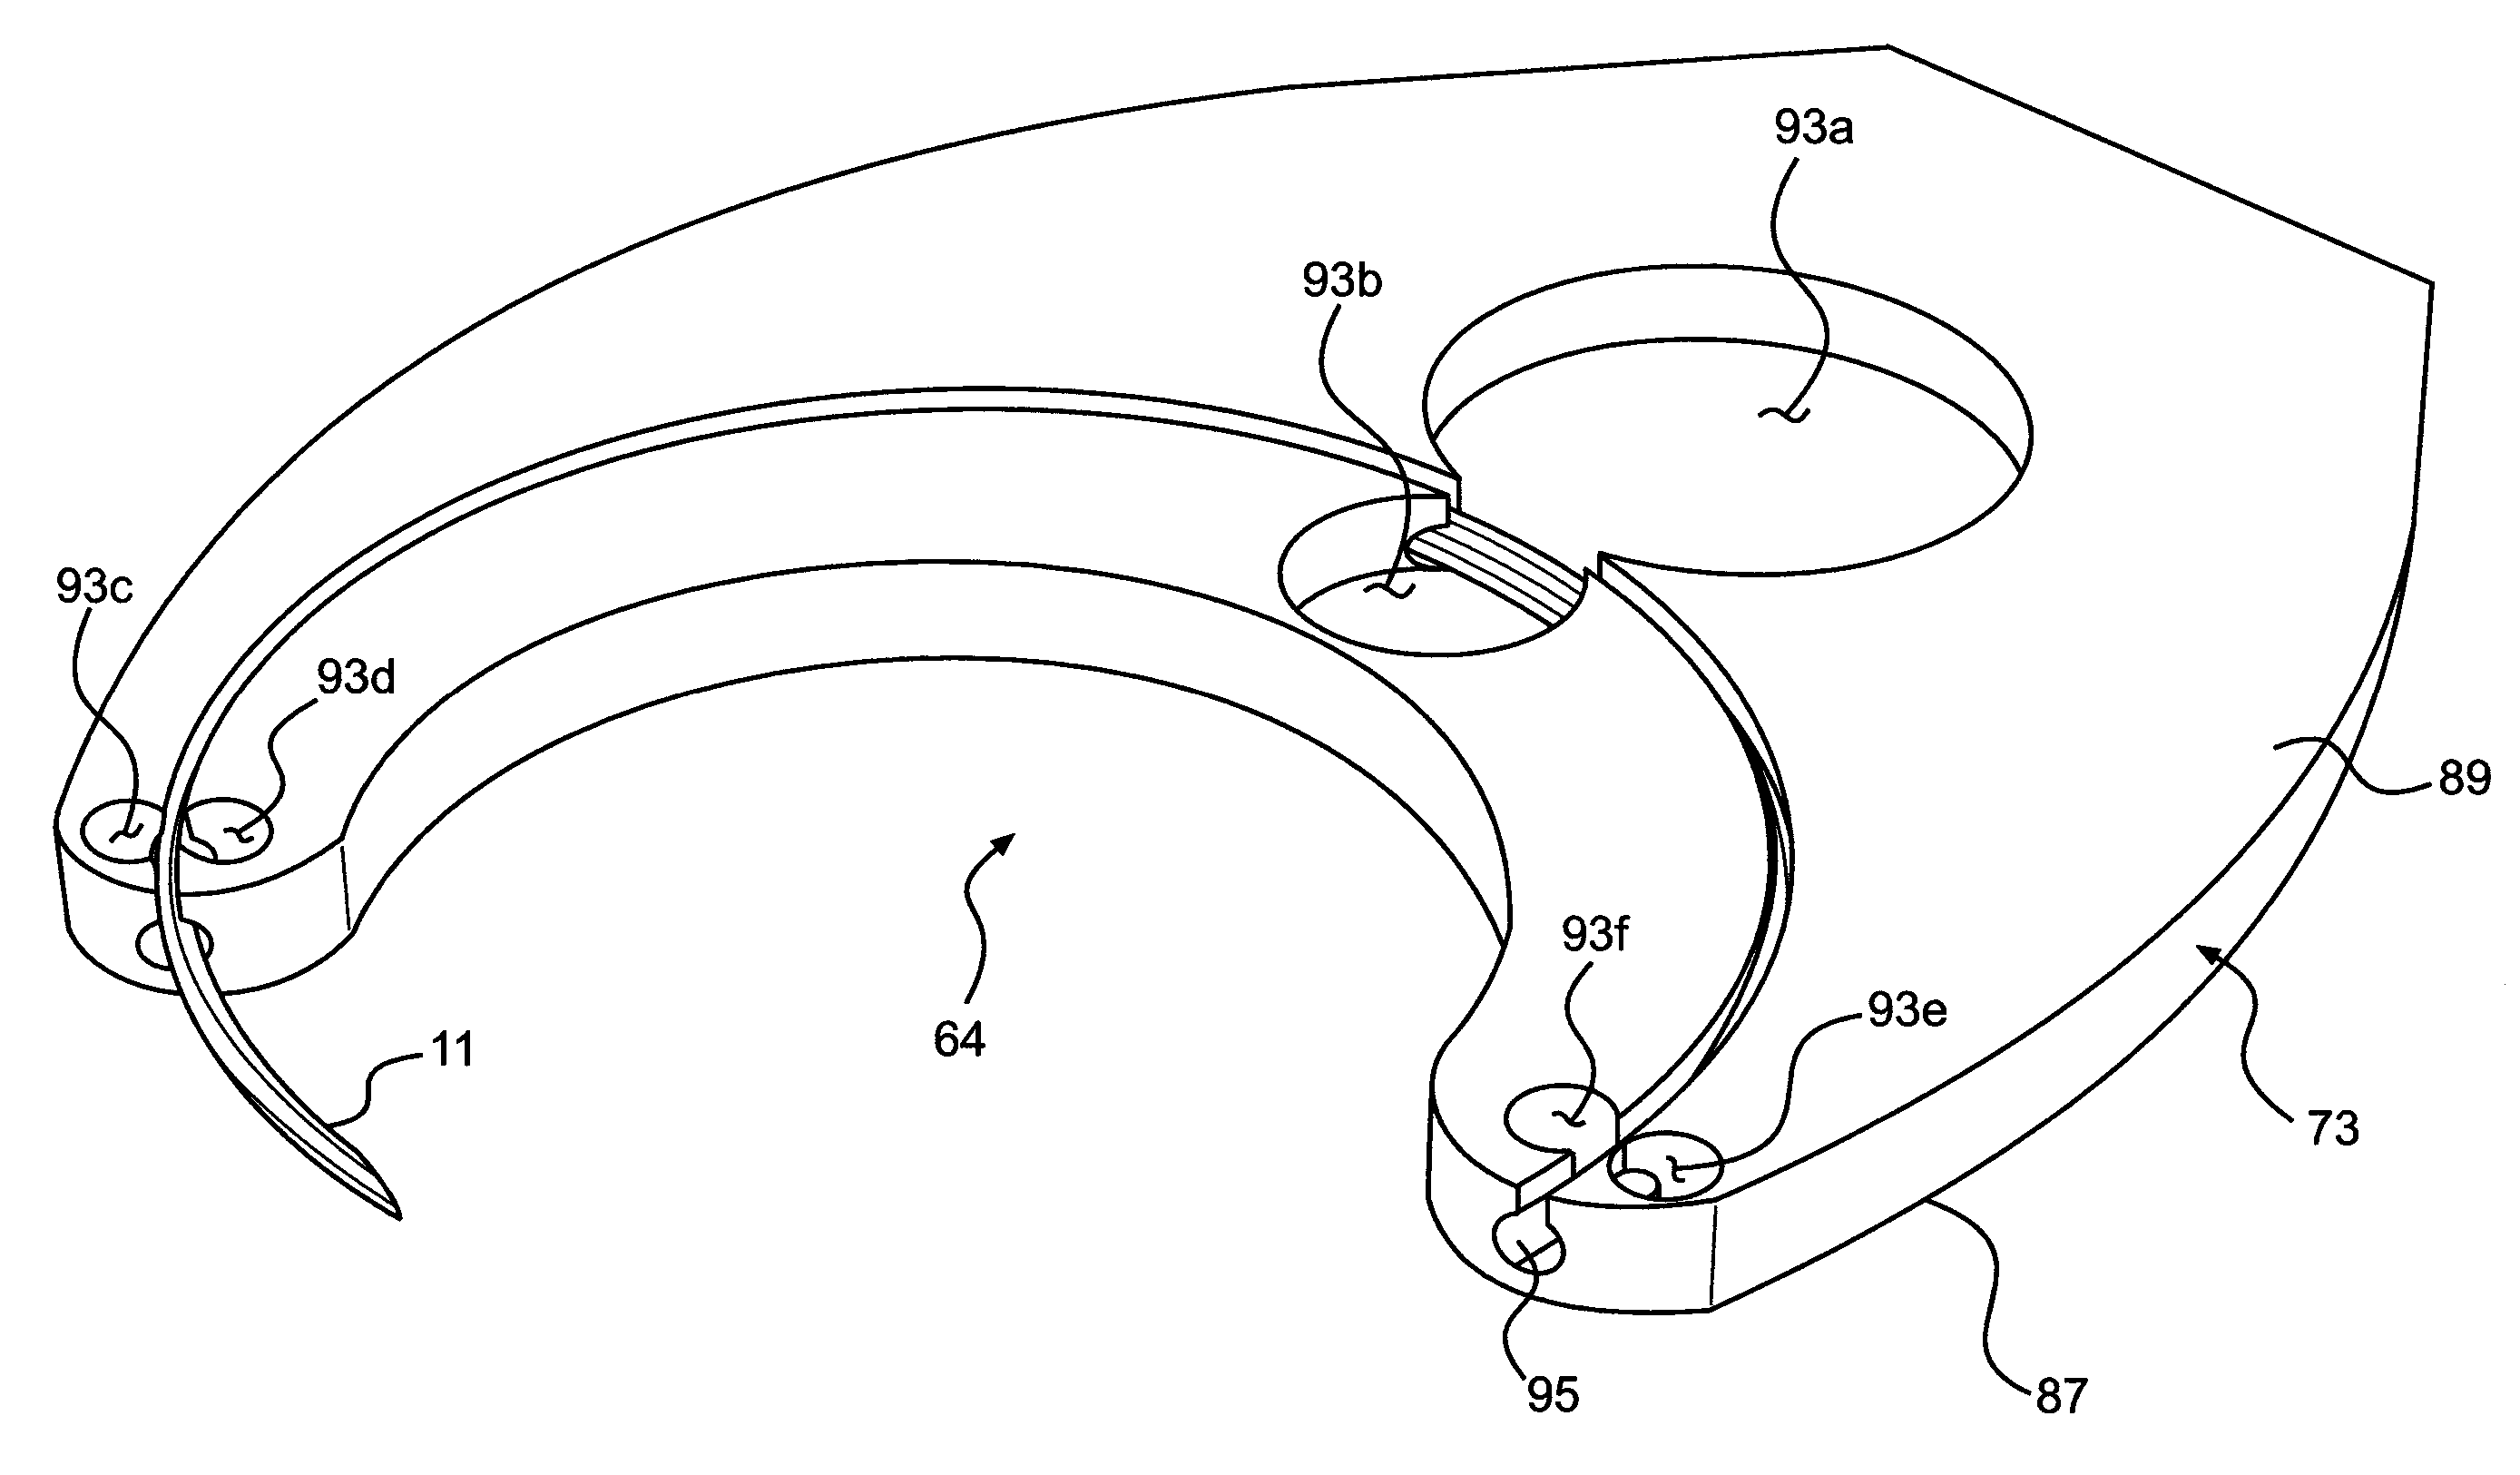 Suturing and knot-tying device